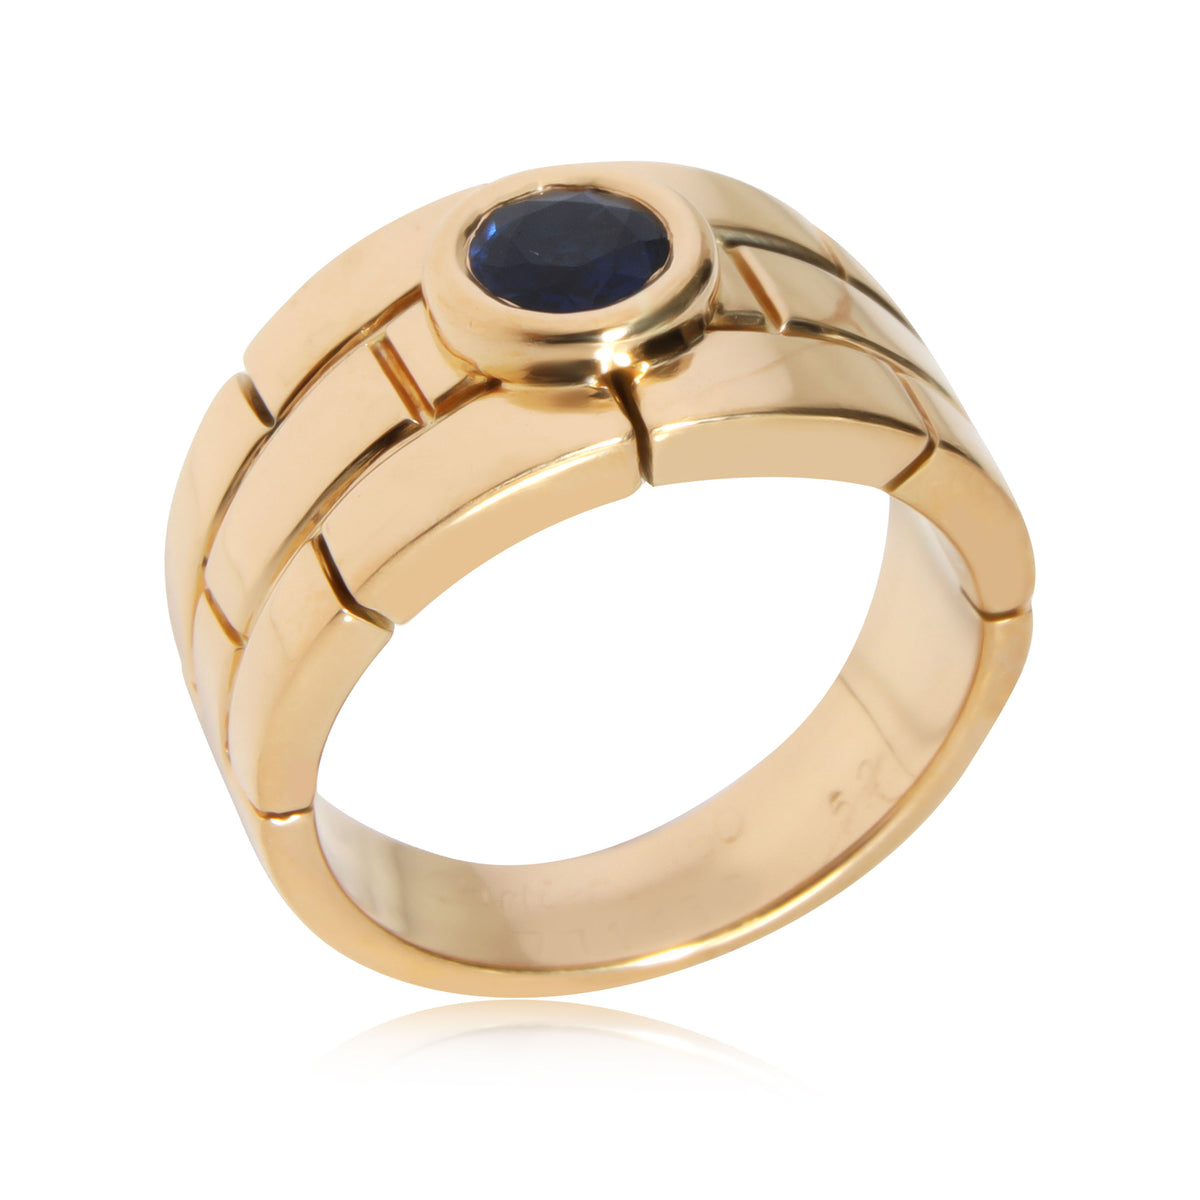 Cartier Panthere Sapphire Ring in 18K Yellow Gold